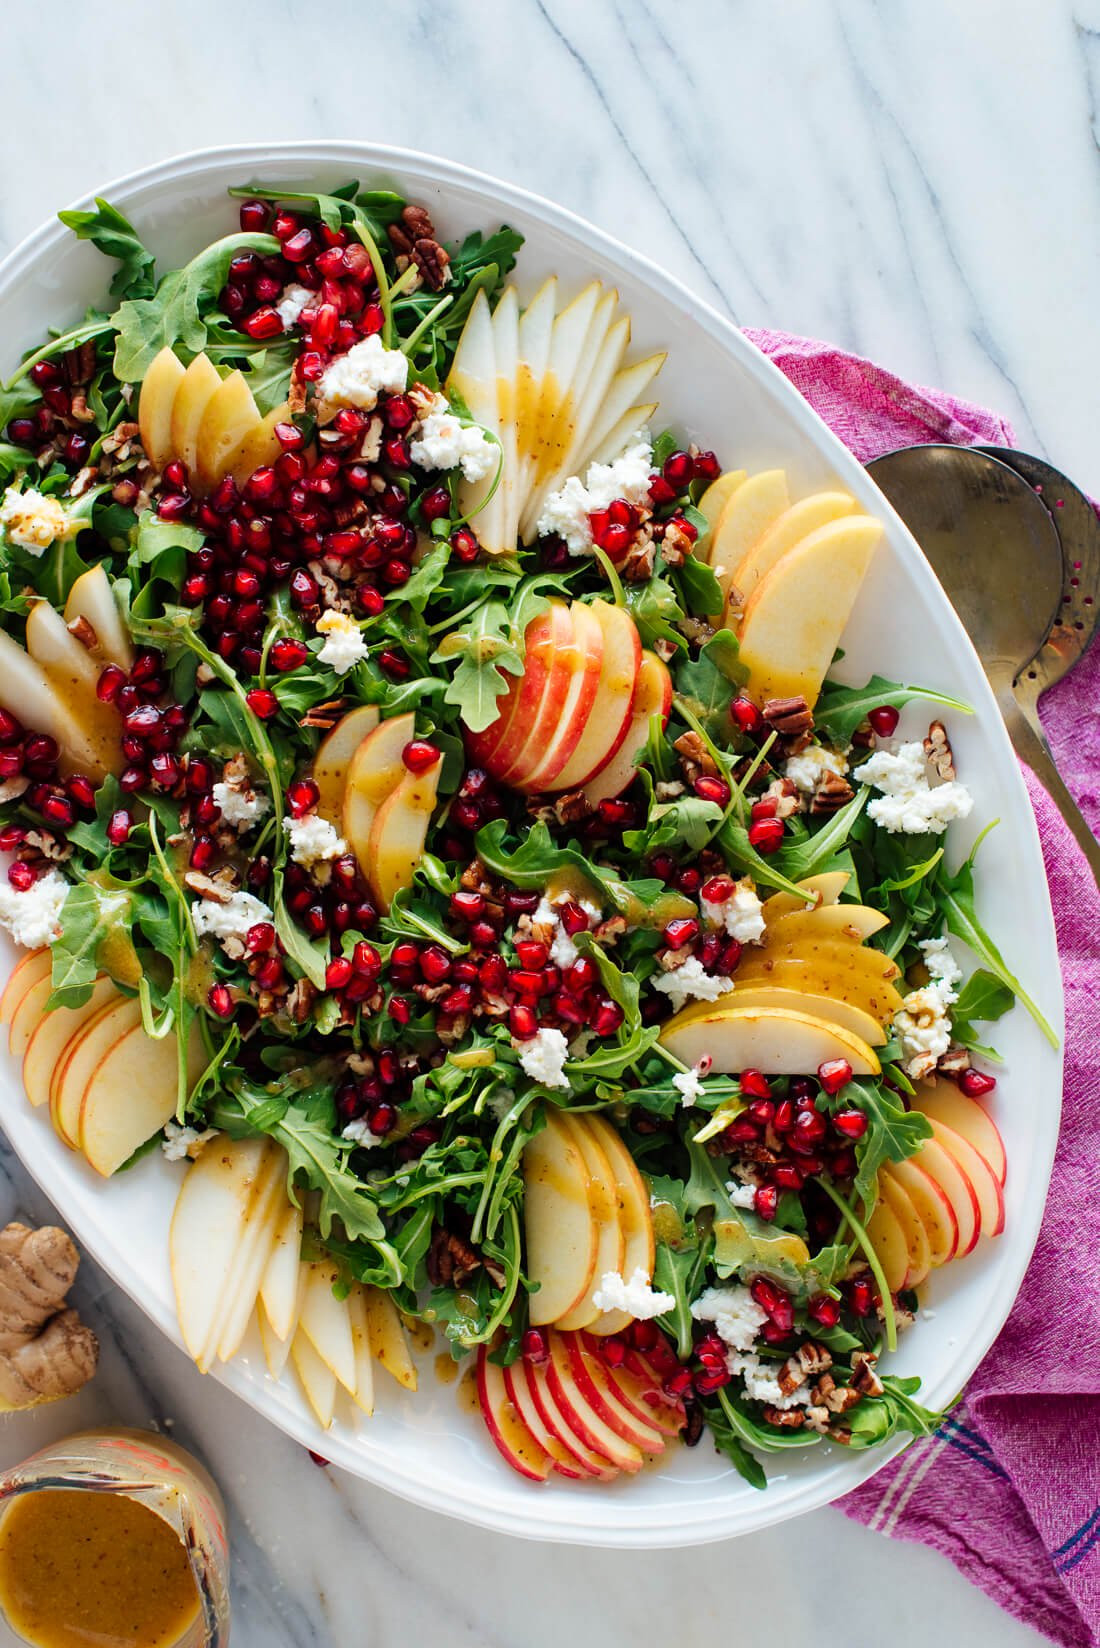 Pear Salad Recipes
 Pomegranate & Pear Green Salad with Ginger Dressing